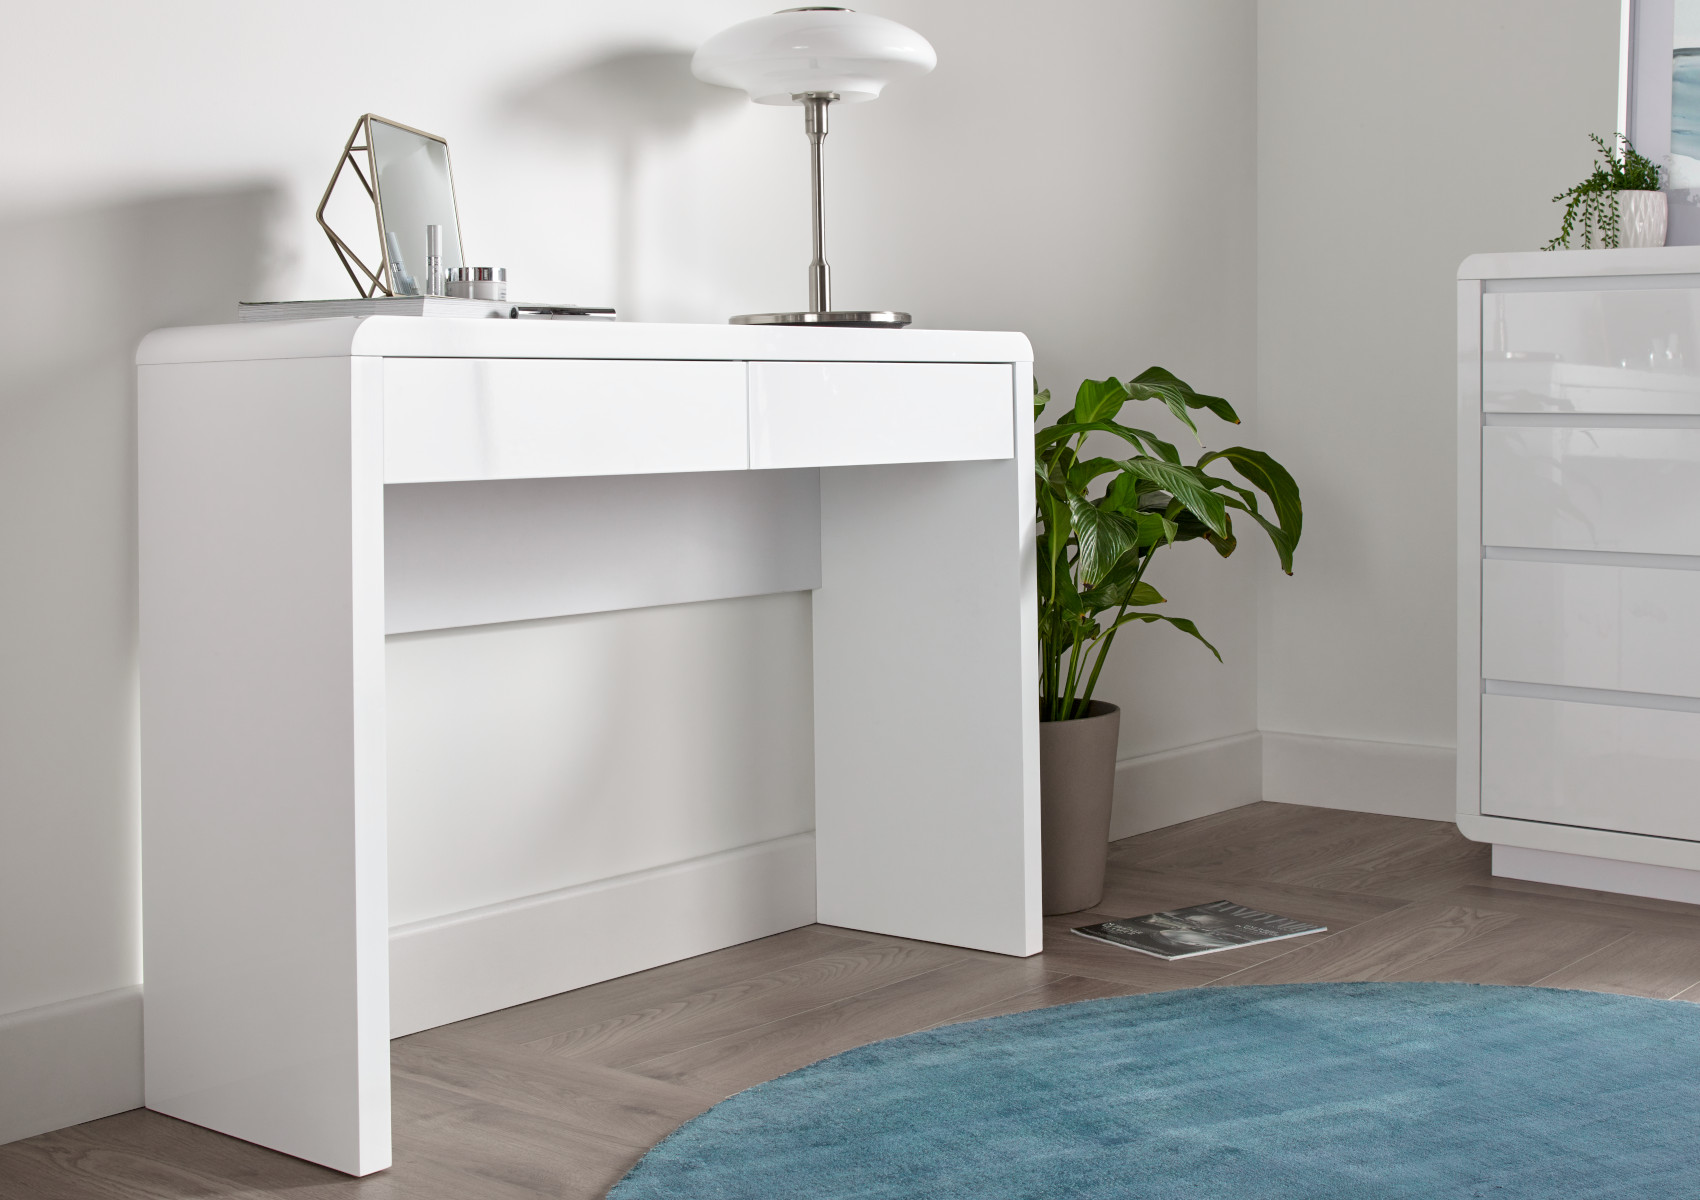 View Marlow White High Gloss 2 Draw Dressing Table Time4Sleep information